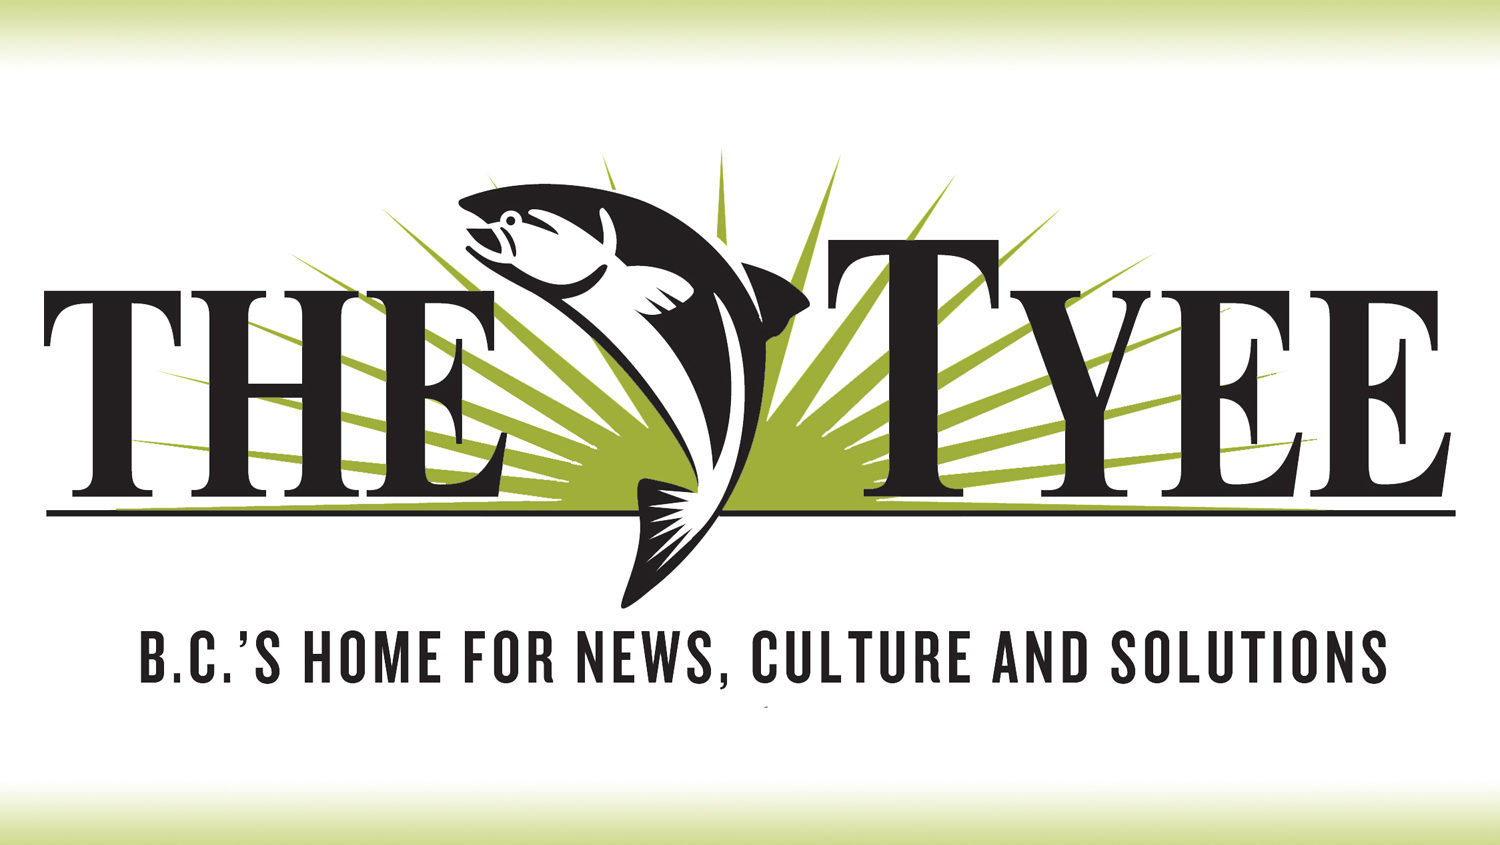 The Tyee, B.C.'s Home For News Culture and Solutions logo